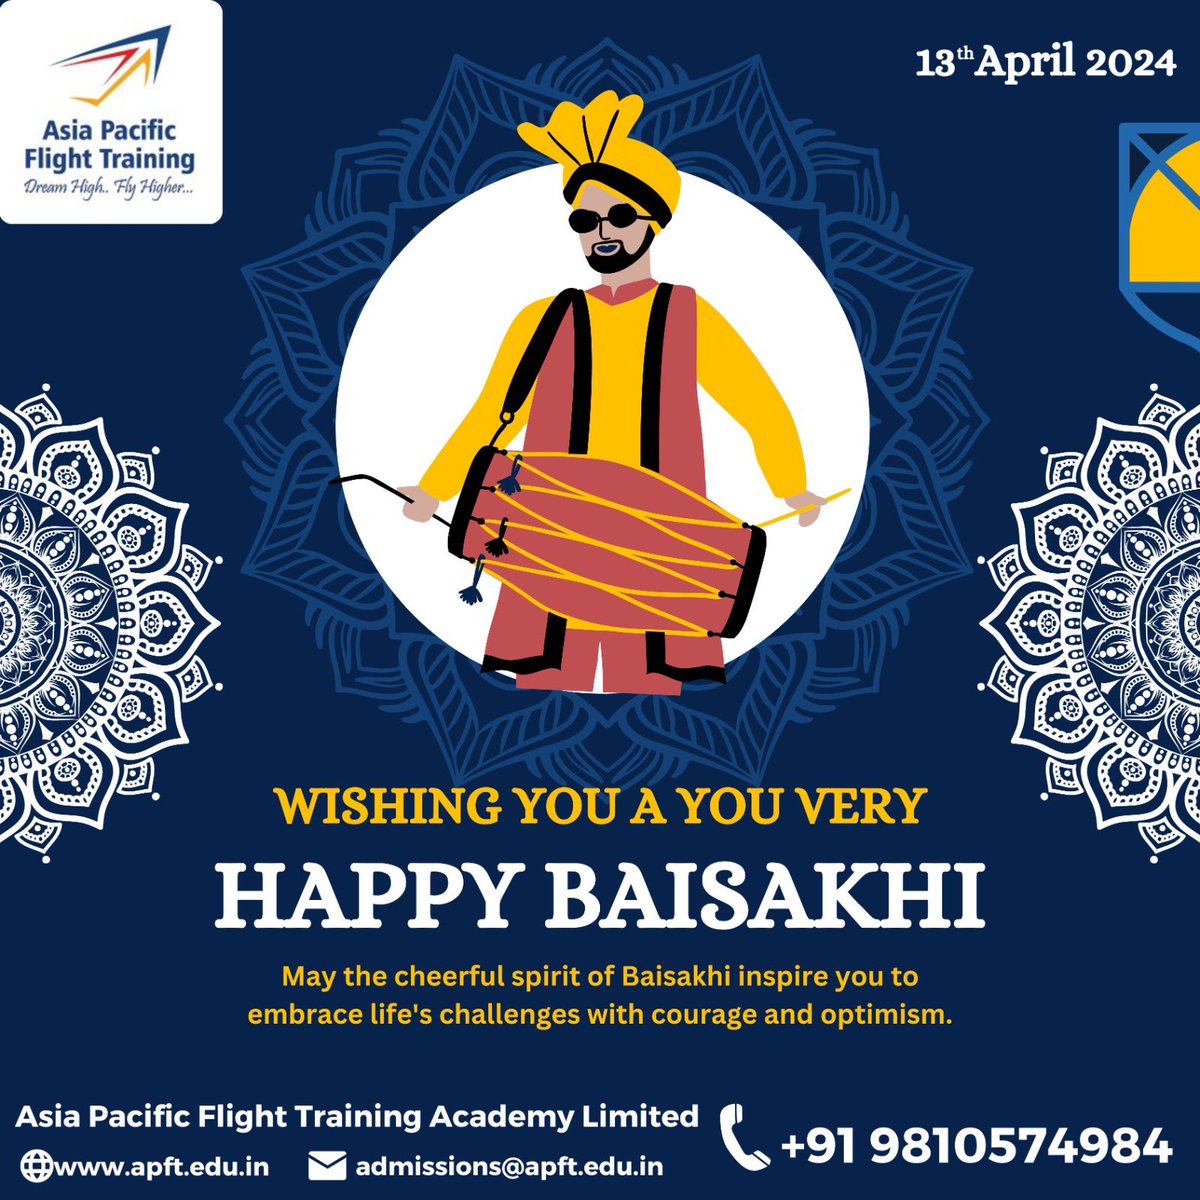 Wishing you a very Happy Baisakhi May the cheerful spirit of Baisakhi inspire you to embrace life’s challenges with courage and optimism. Visit us: apft.edu.in Write to us: admissions@apft.edu.in Contact us: +91 9810574984 #Baisakhi2024 #avgeek